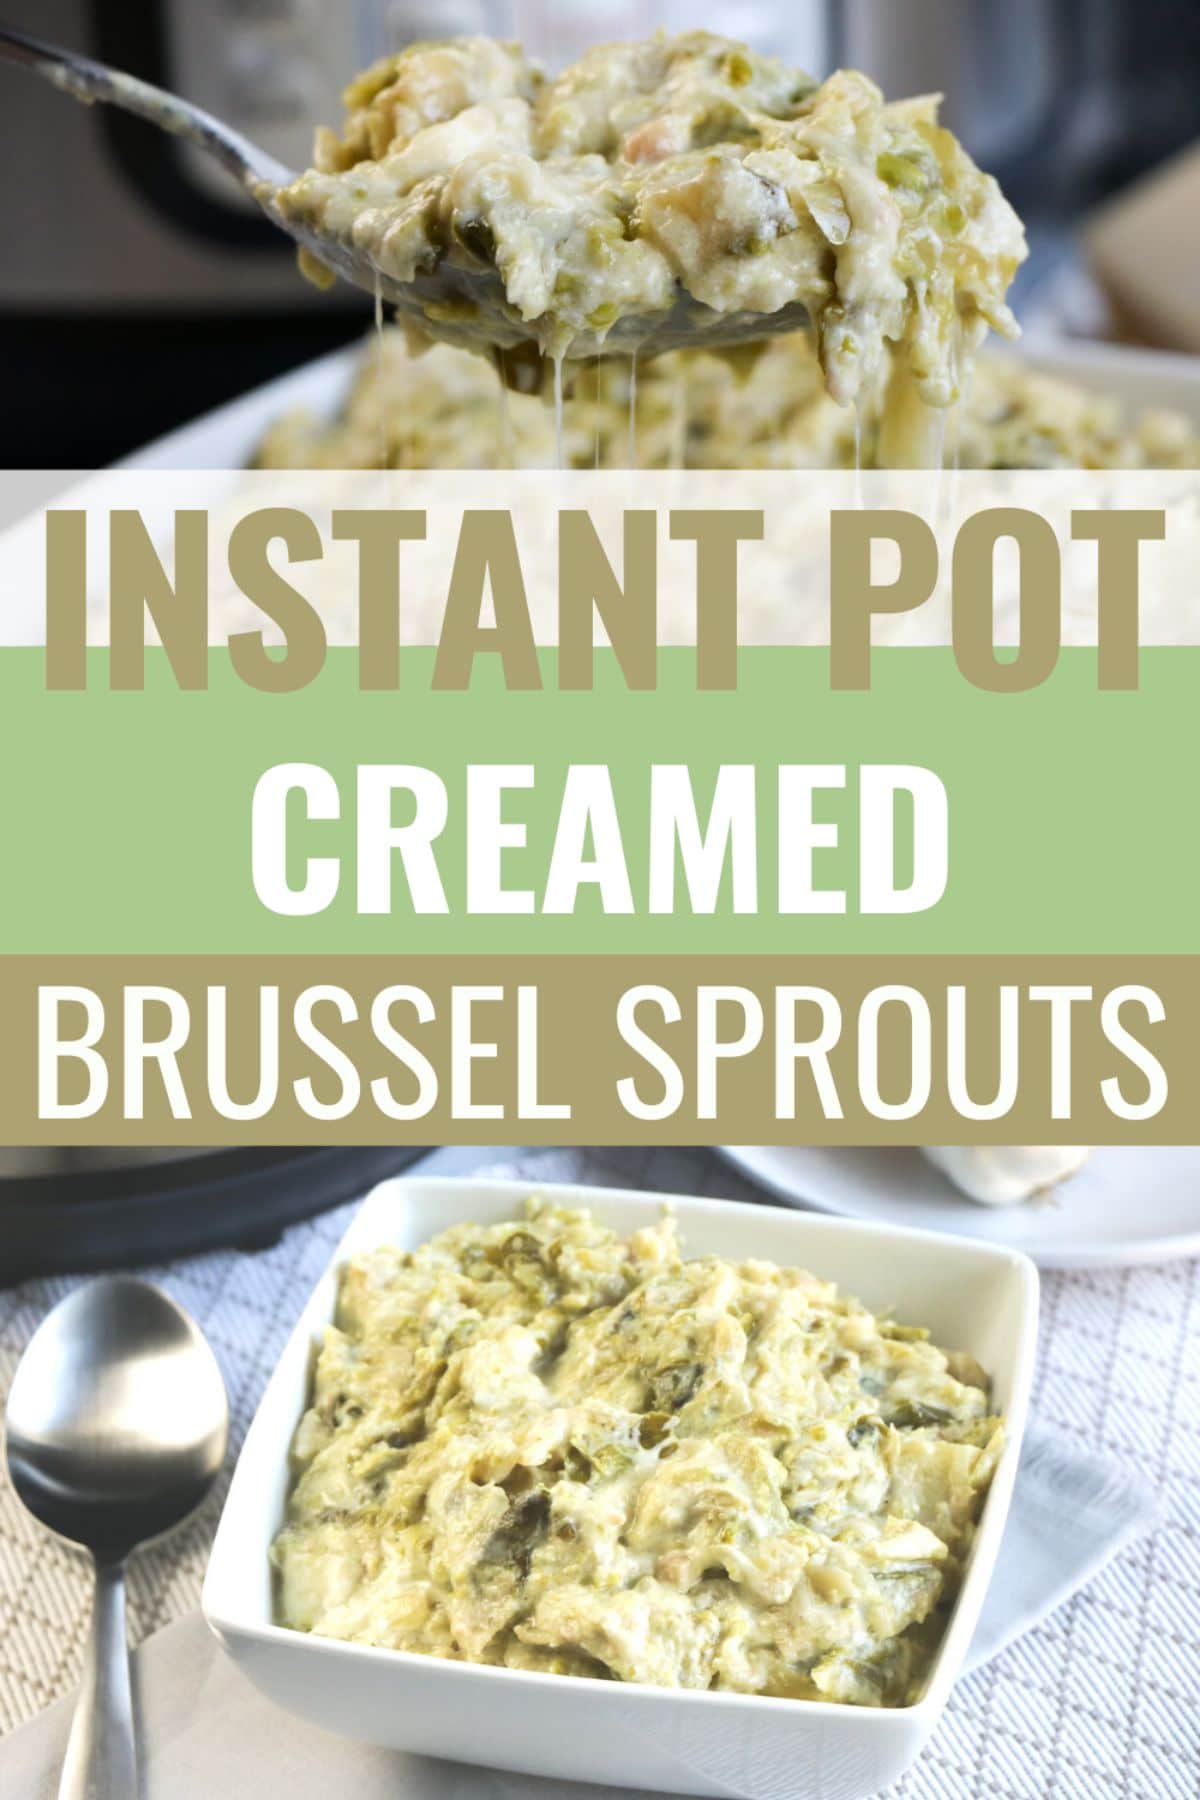 A collage of 2 images of Instant Pot Creamed Brussel Sprouts with a large text at the center saying "Instant Pot Creamed Brussel Sprouts" written on a white, mint green, and lime green text boxes.